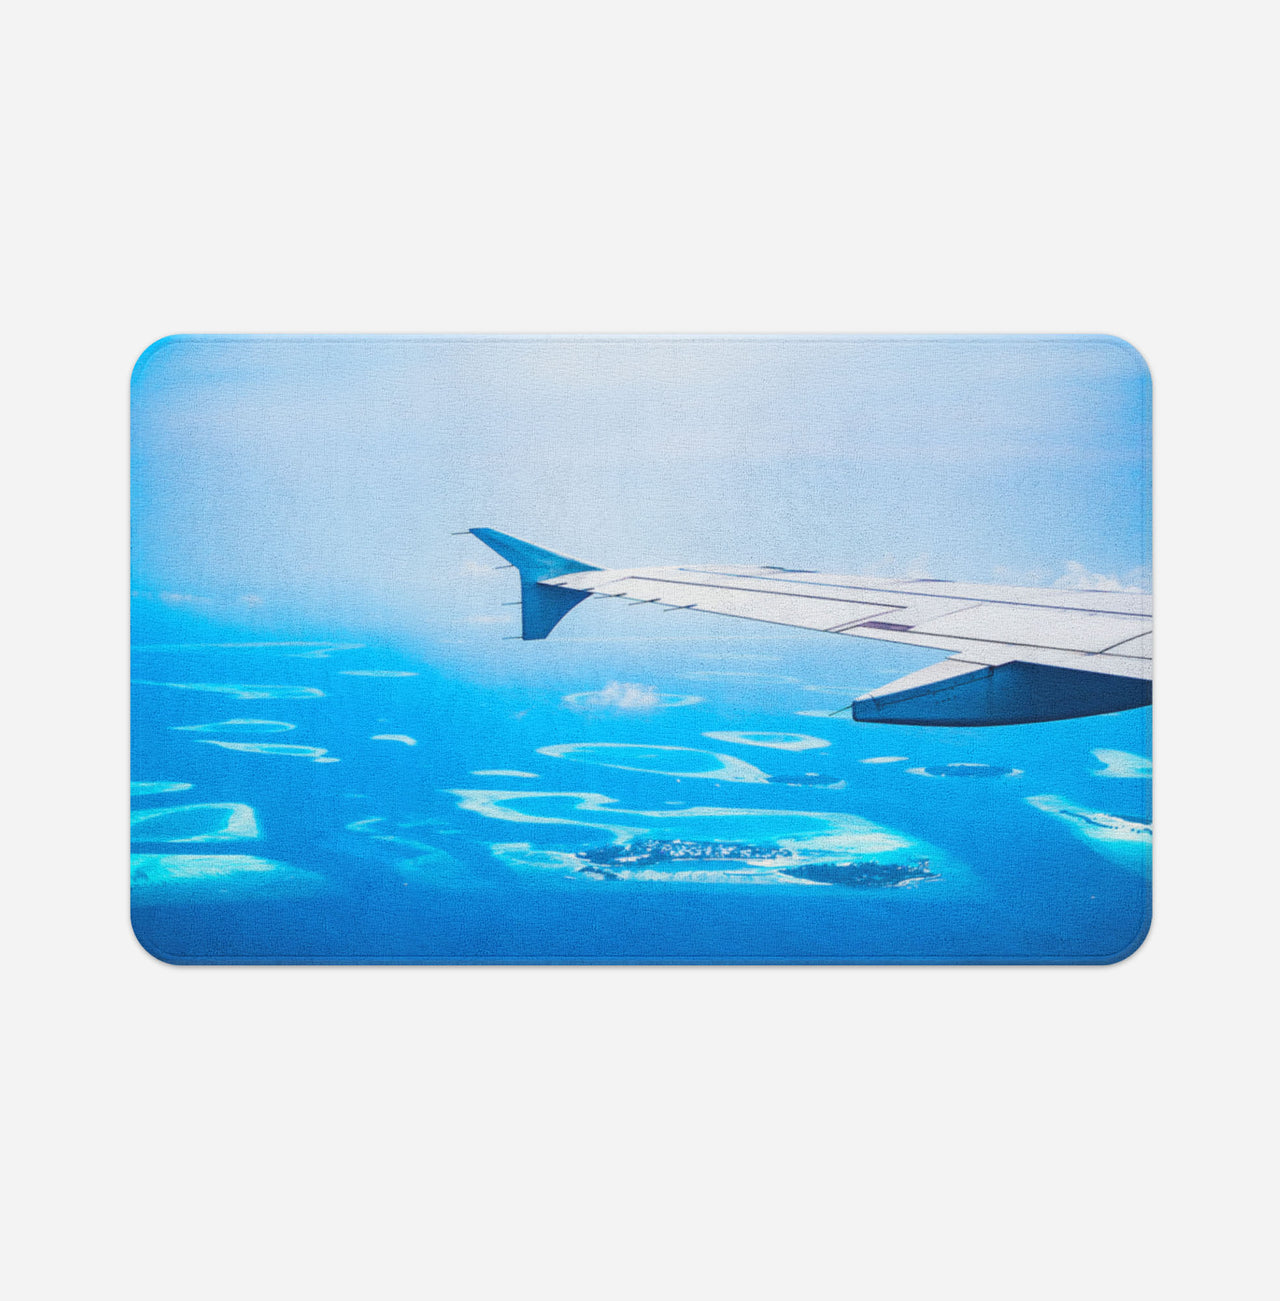 Outstanding View Through Airplane Wing Designed Bath Mats